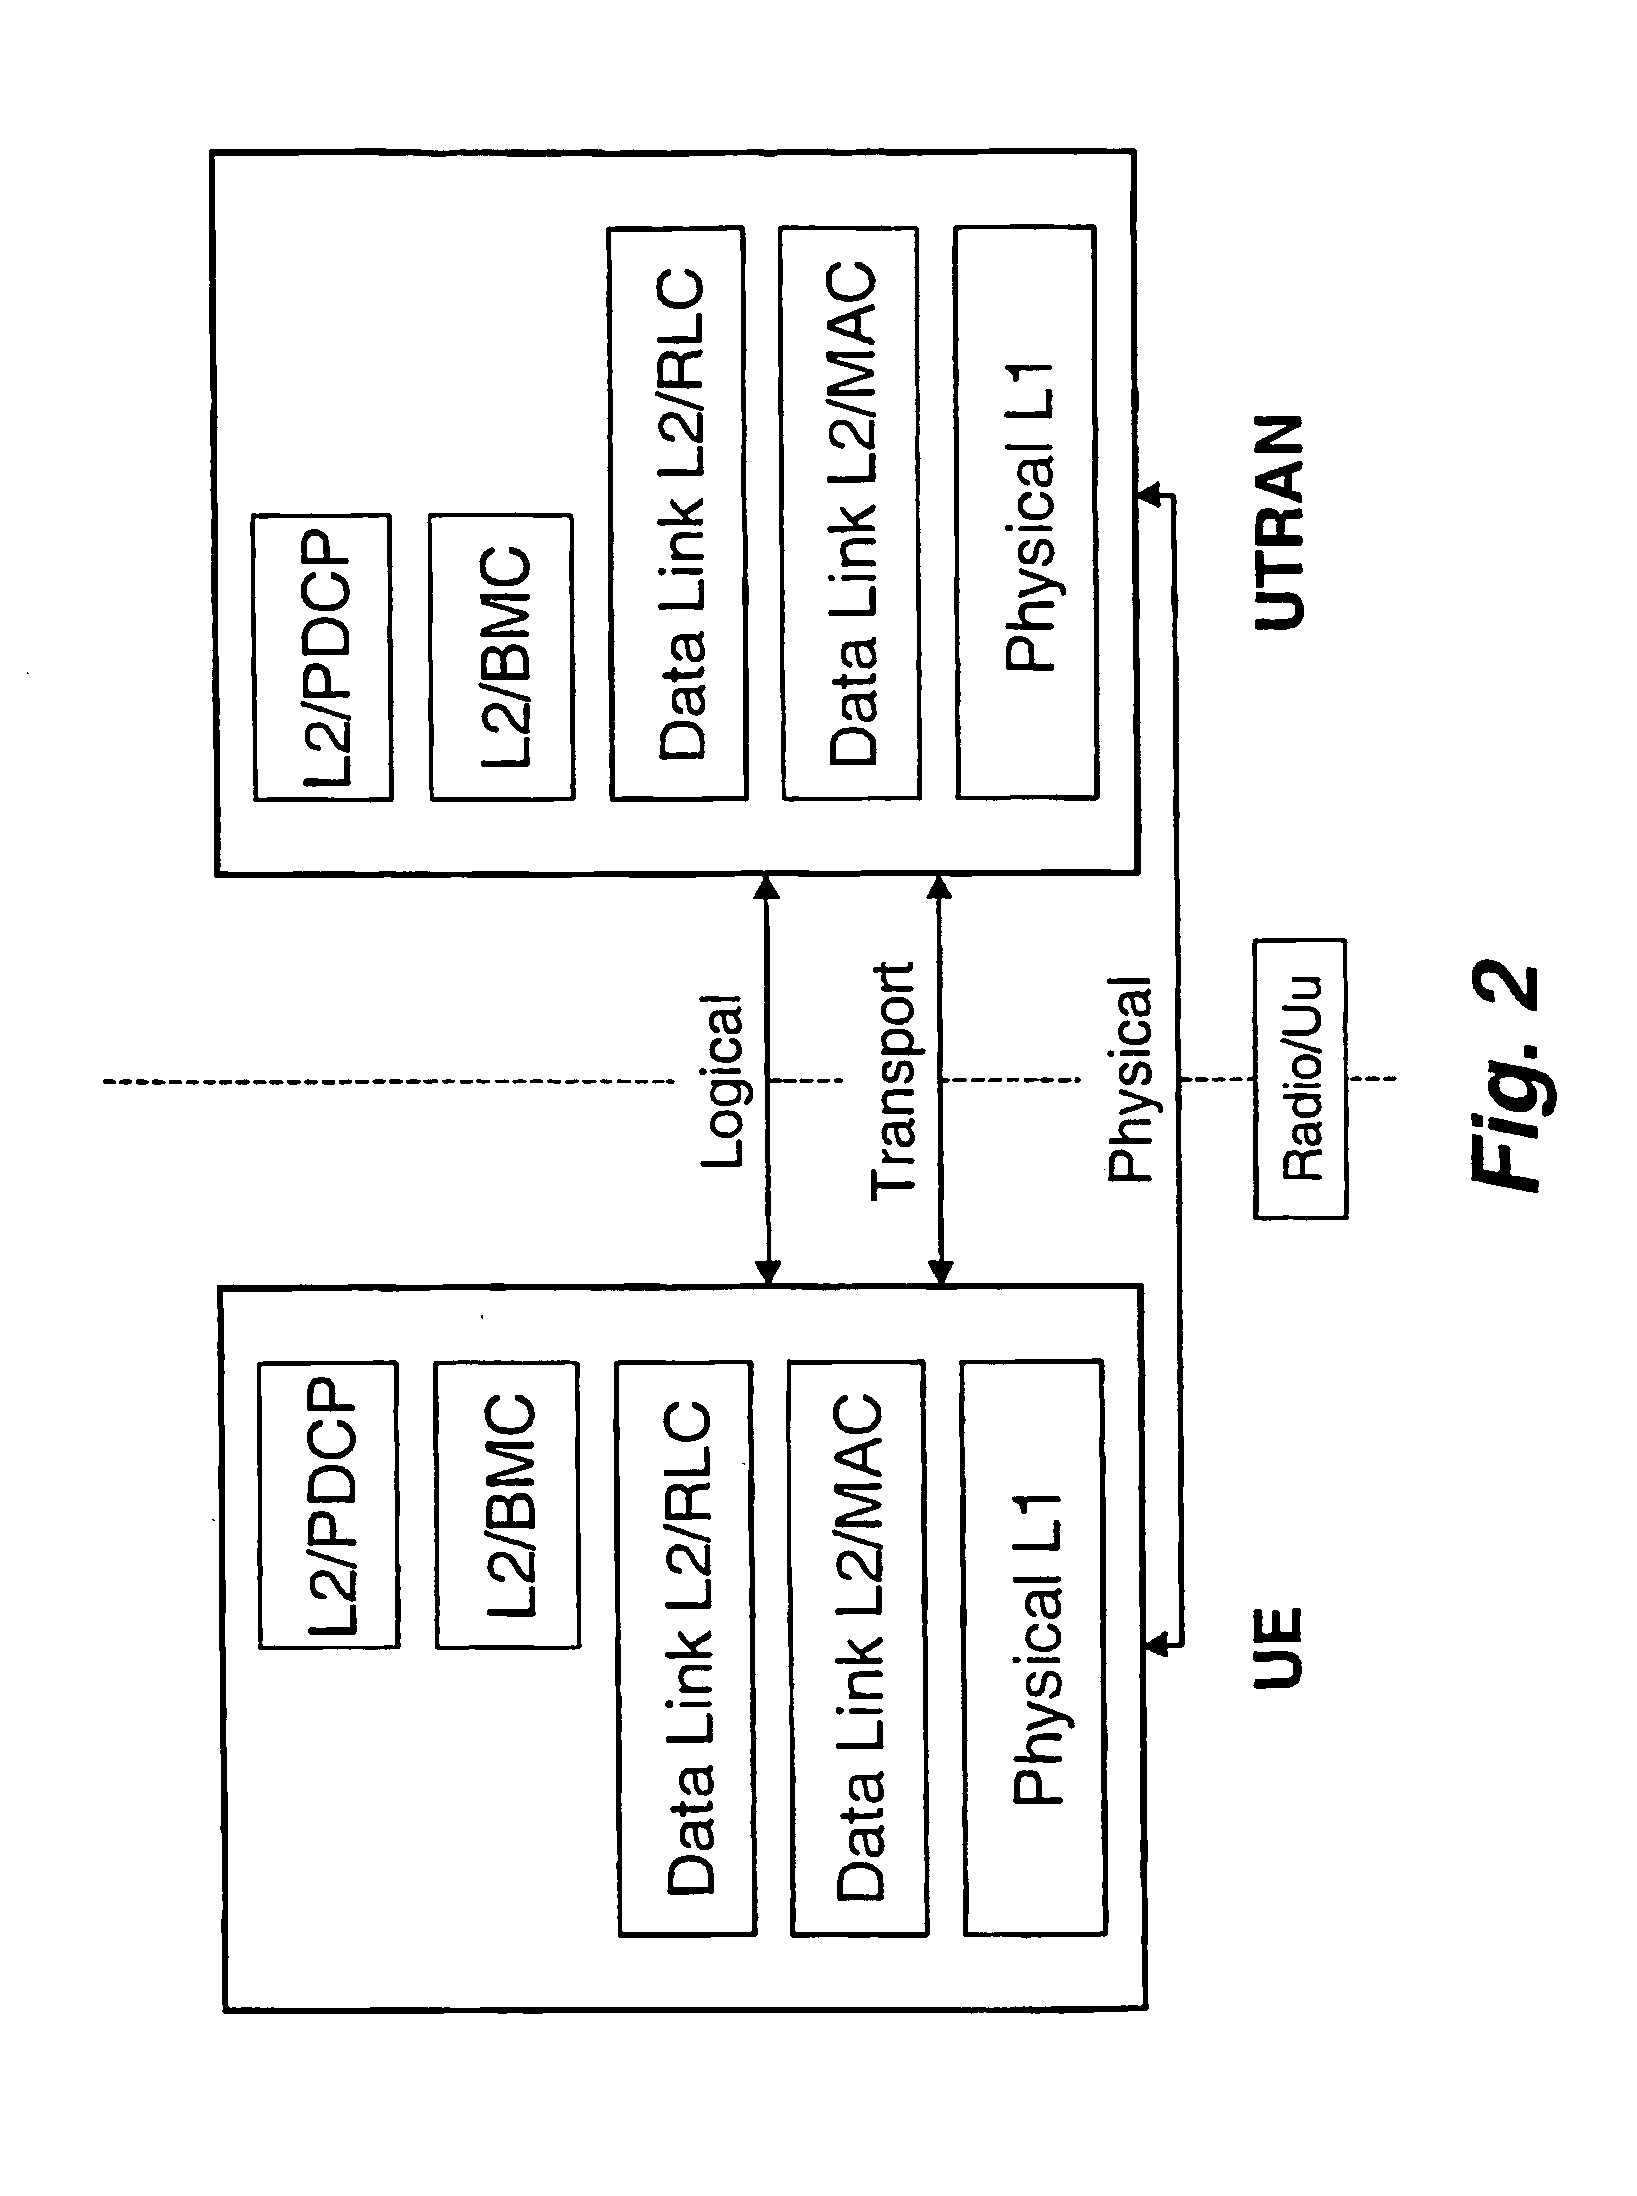 Method and system of channel adaptation